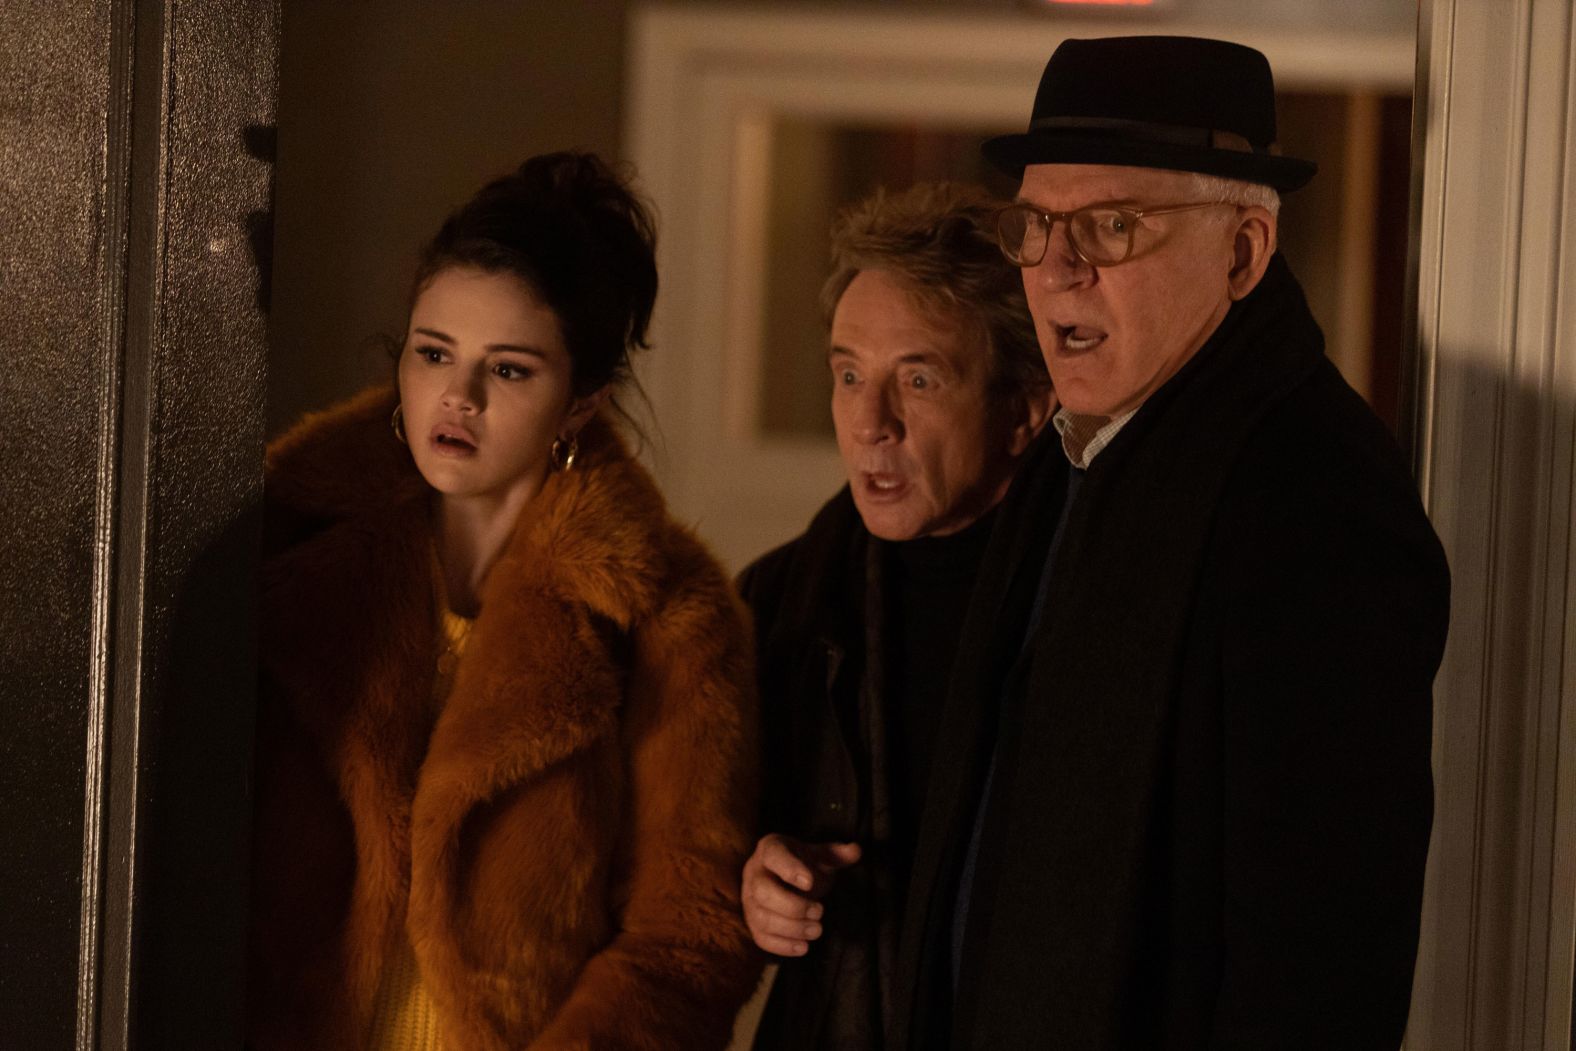 <strong>"Only Murders In The Building"</strong>: This comedic murder-mystery series for the ages follows three strangers (played by Selena Gomez, Martin Short and Steve Martin) who share an obsession with true crime and suddenly find themselves wrapped up in one.<strong> (Hulu) </strong>